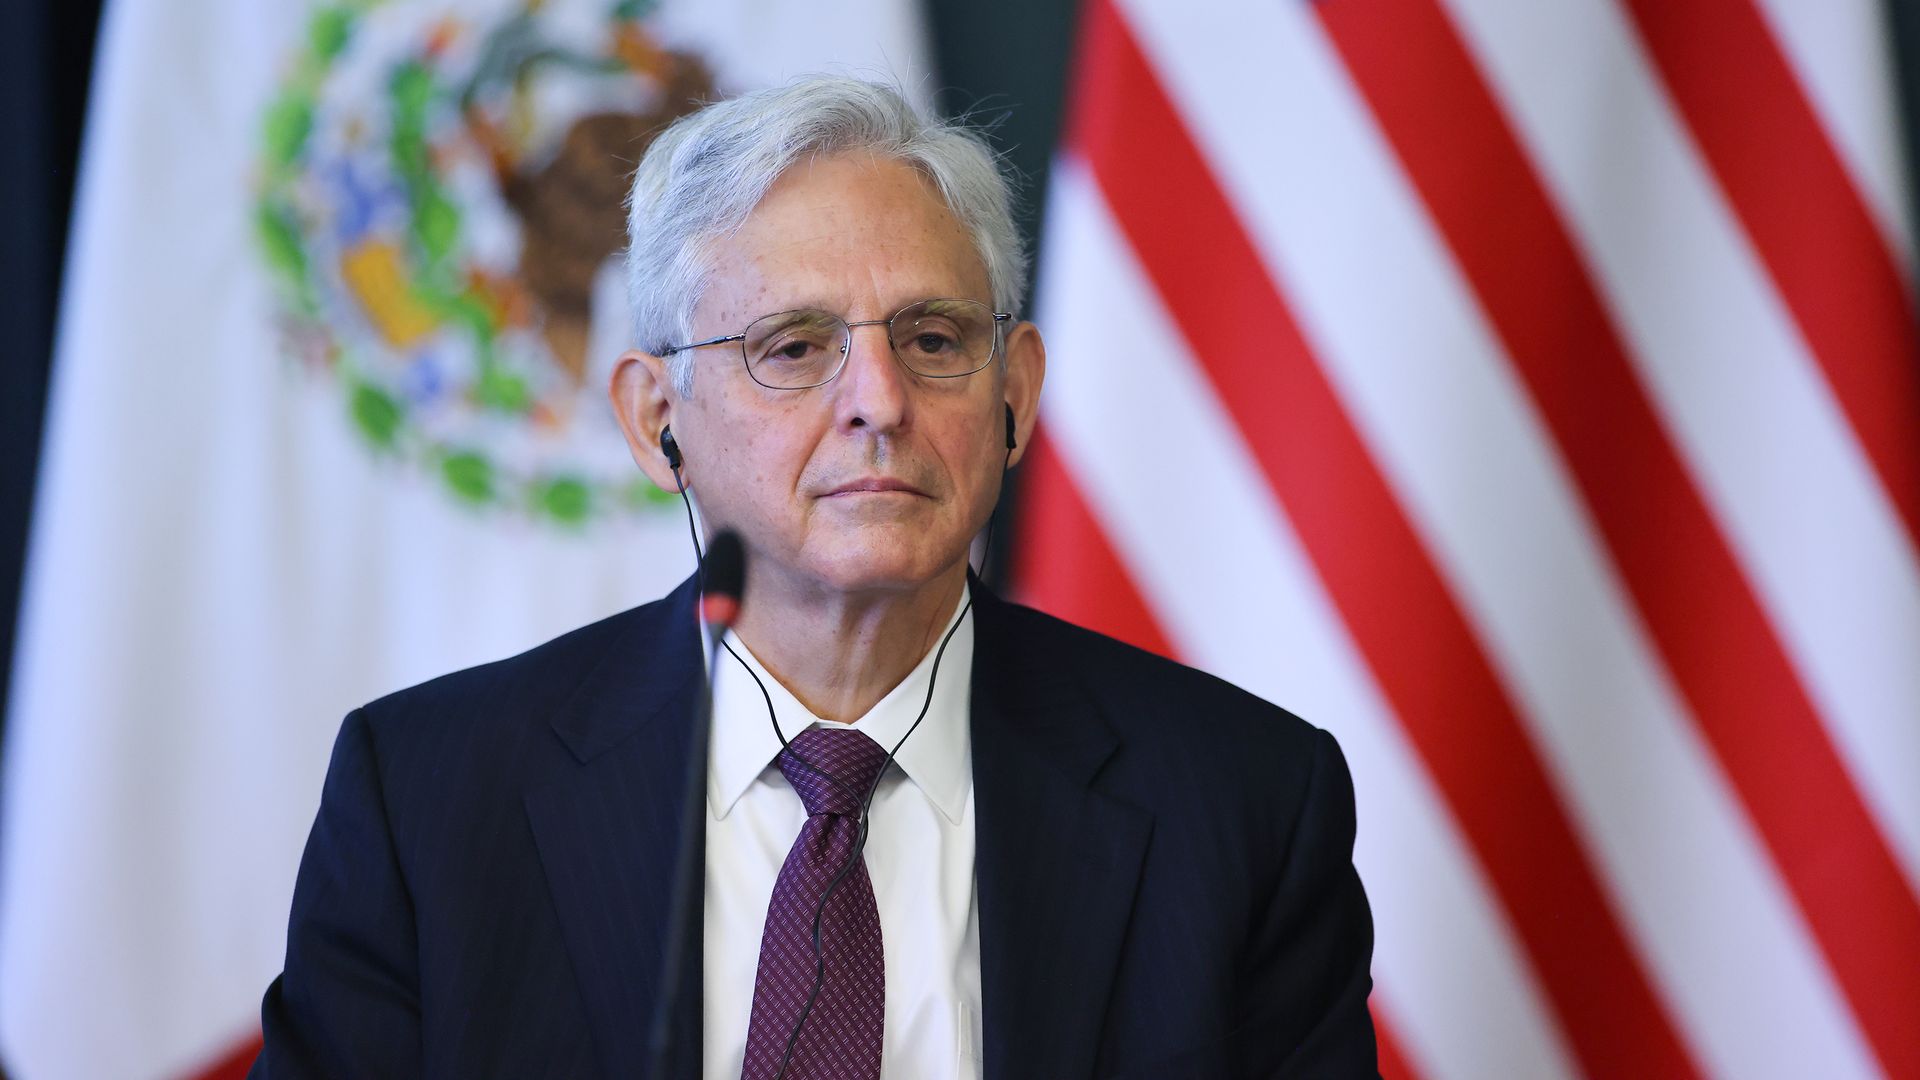  Attorney General Merrick Garland during a news conference a on October 08, 2021 in Mexico City, Mexico.